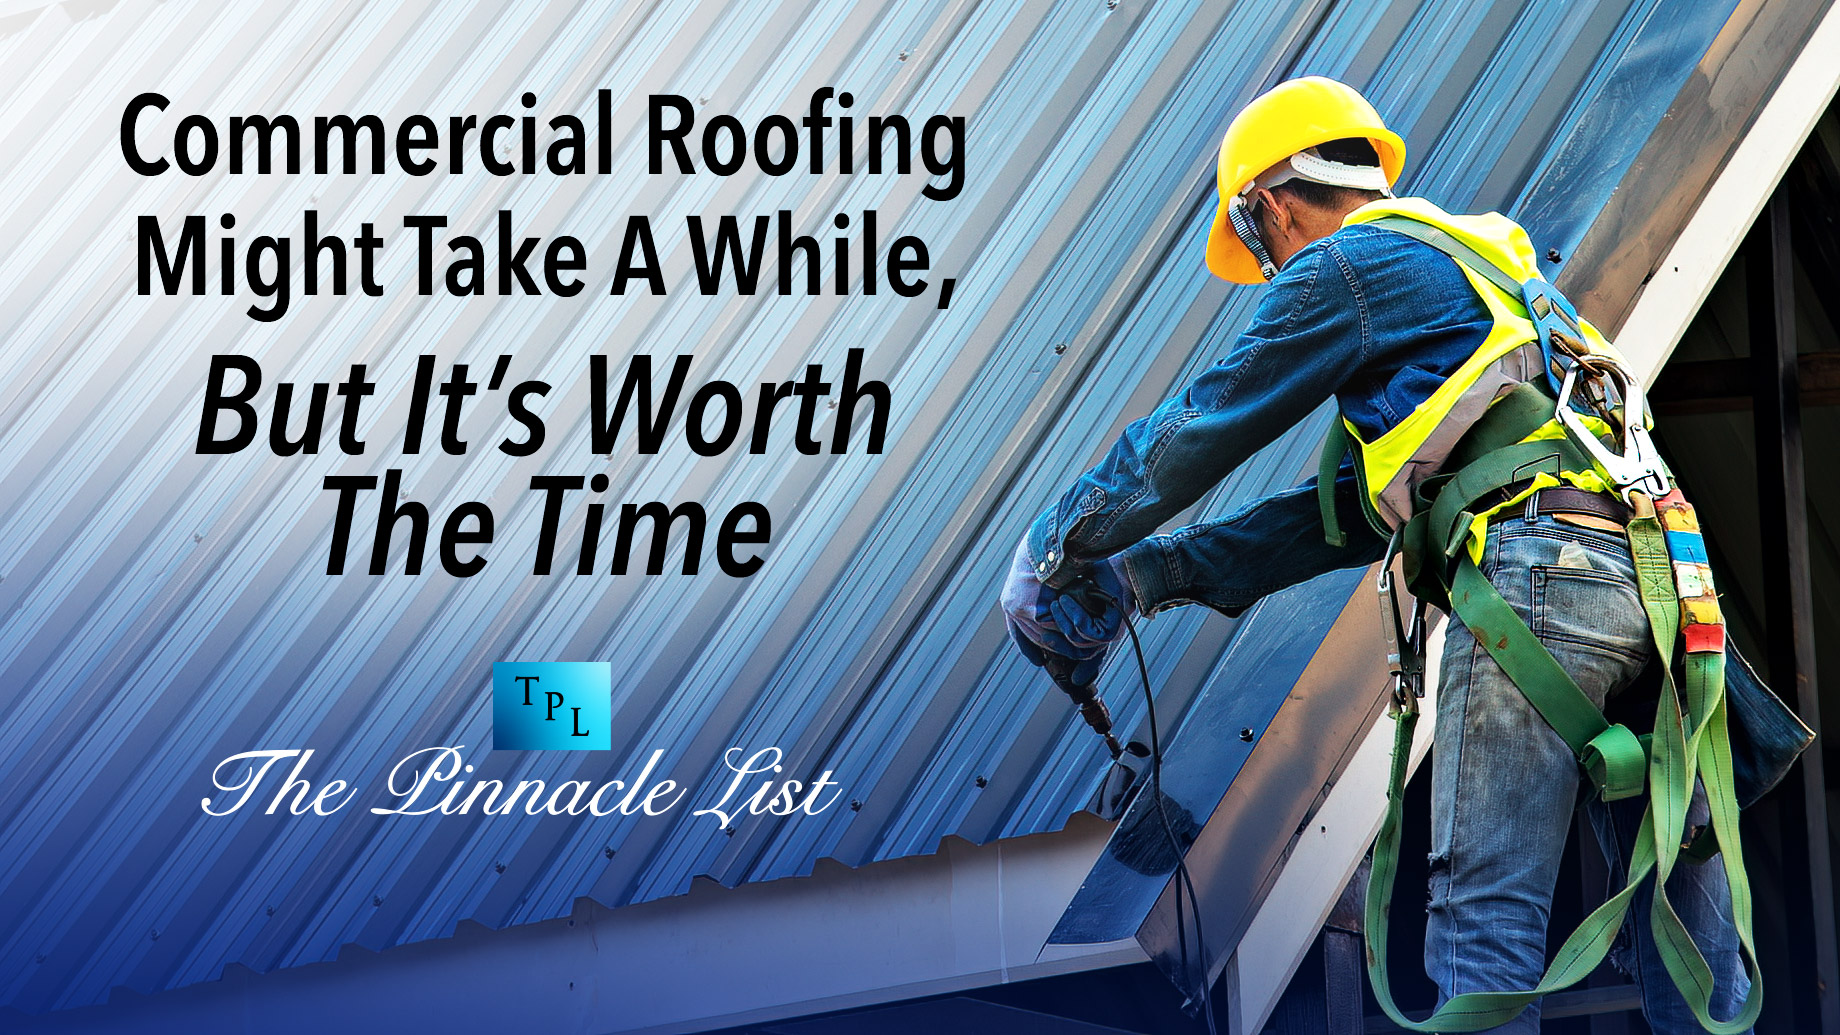 Commercial Roofing Might Take A While, But It’s Worth The Time